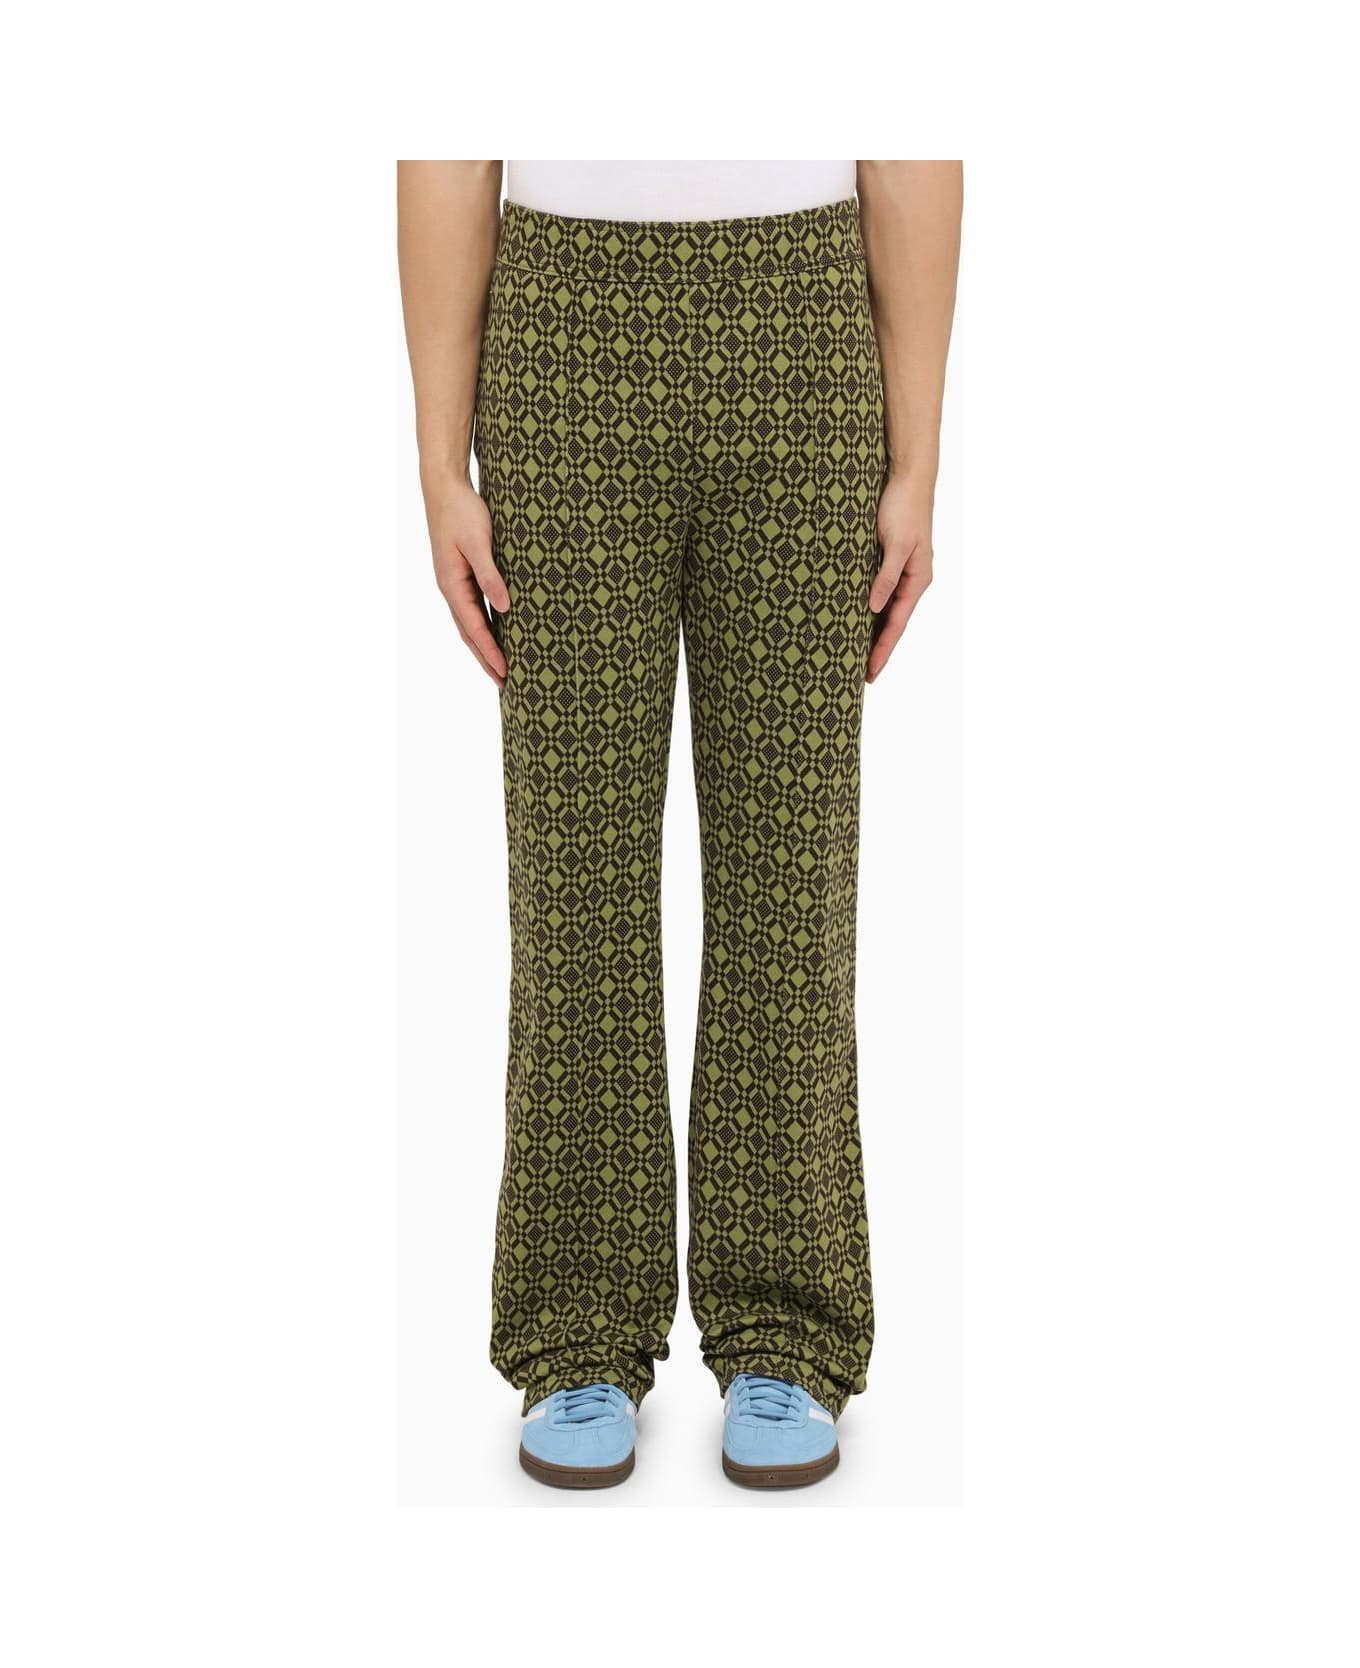 Wales Bonner Olive Green\/brown Cotton Power Sports Trousers - GREEN